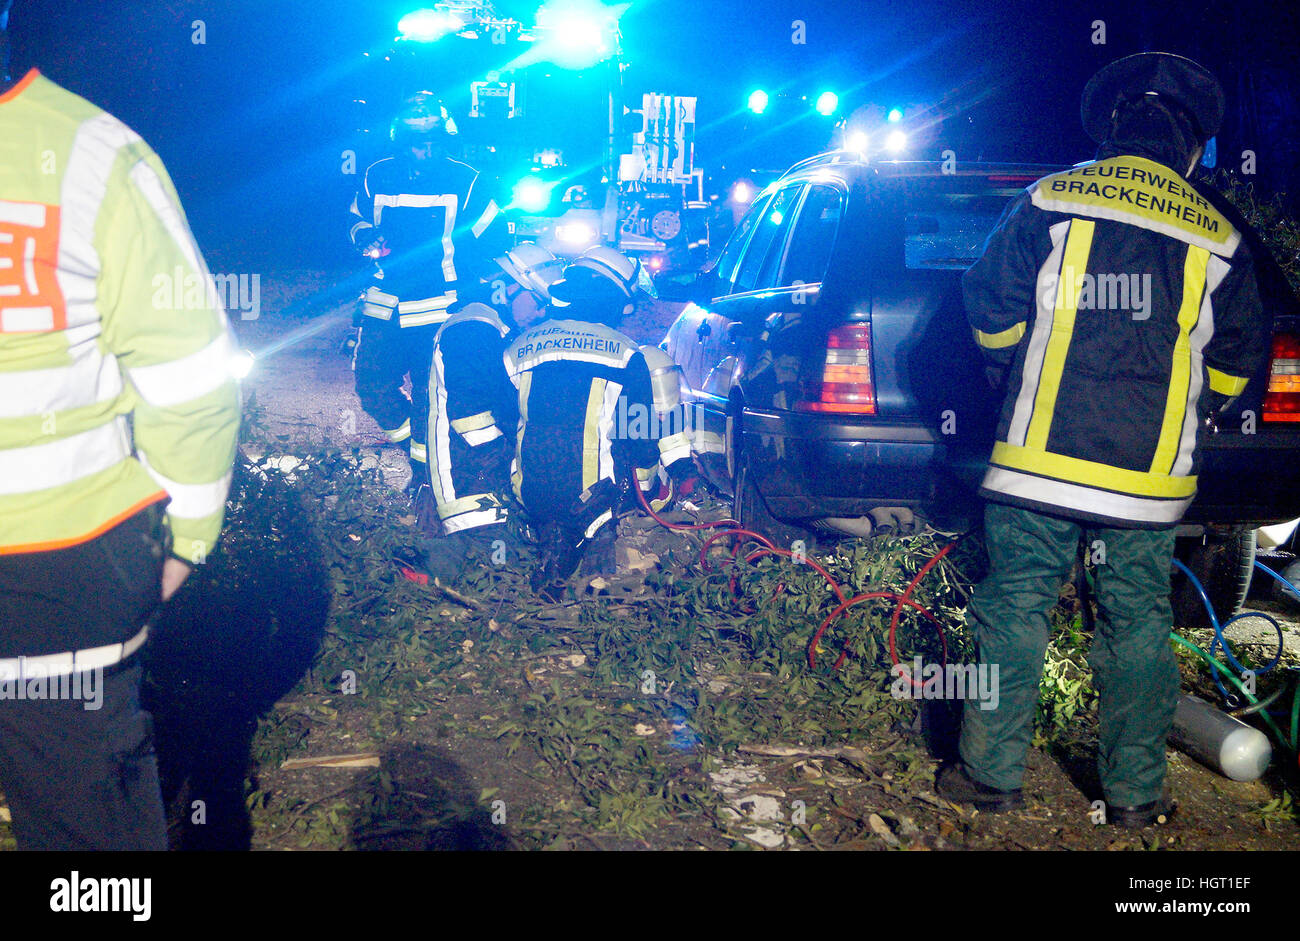 Neipperg, Germany. 13th Jan, 2017. Fire fighters secure a site of an accident on a street near Neipperg, Germany, 13 January 2017. A car hit a tree that had fallen onto the street due to the storm. Photo: Marcel Bartenbach/dpa/Alamy Live News Stock Photo